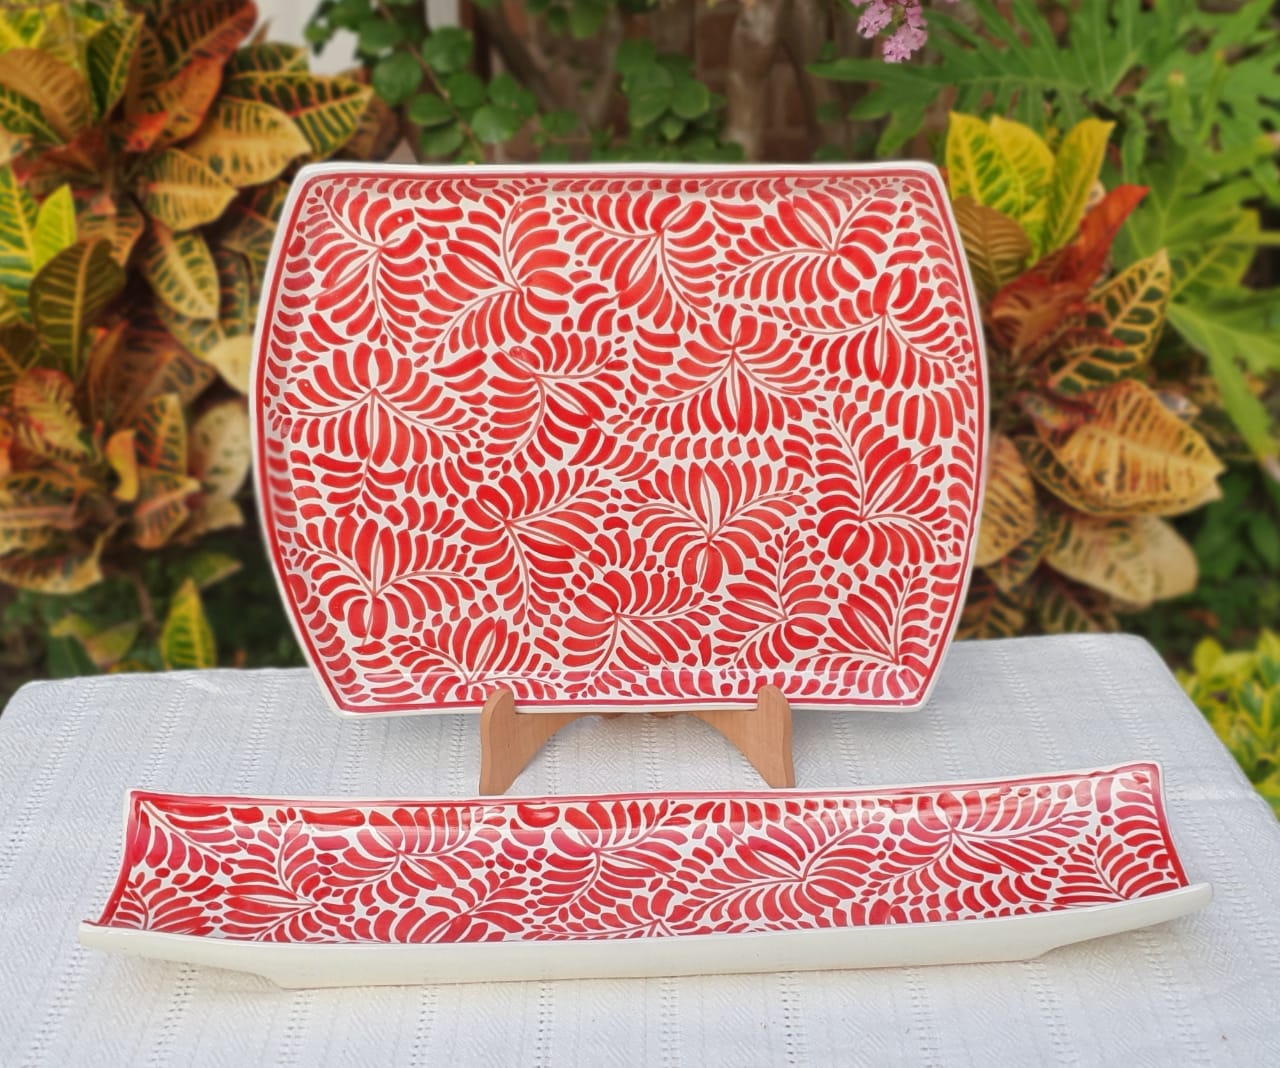 Tray / Snack Set of 2 pieces Milestones Pattern Red and White